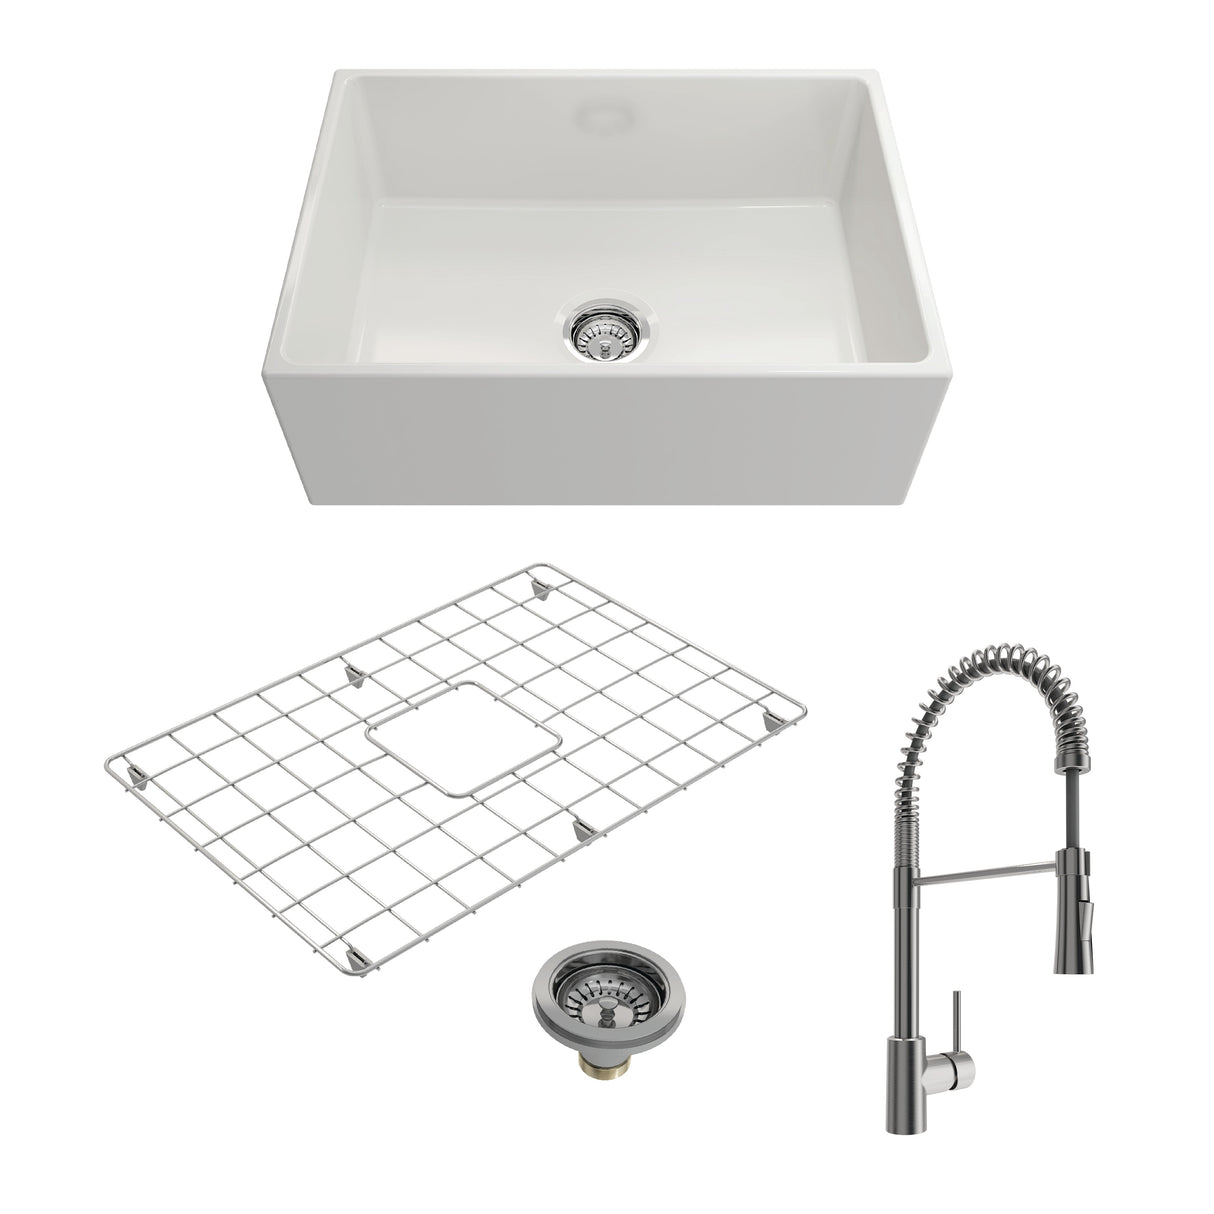 BOCCHI 1356-001-2020SS Kit: 1356 Contempo Apron Front Fireclay 27 in. Single Bowl Kitchen Sink with Protective Bottom Grid and Strainer w/ Livenza 2.0 Faucet